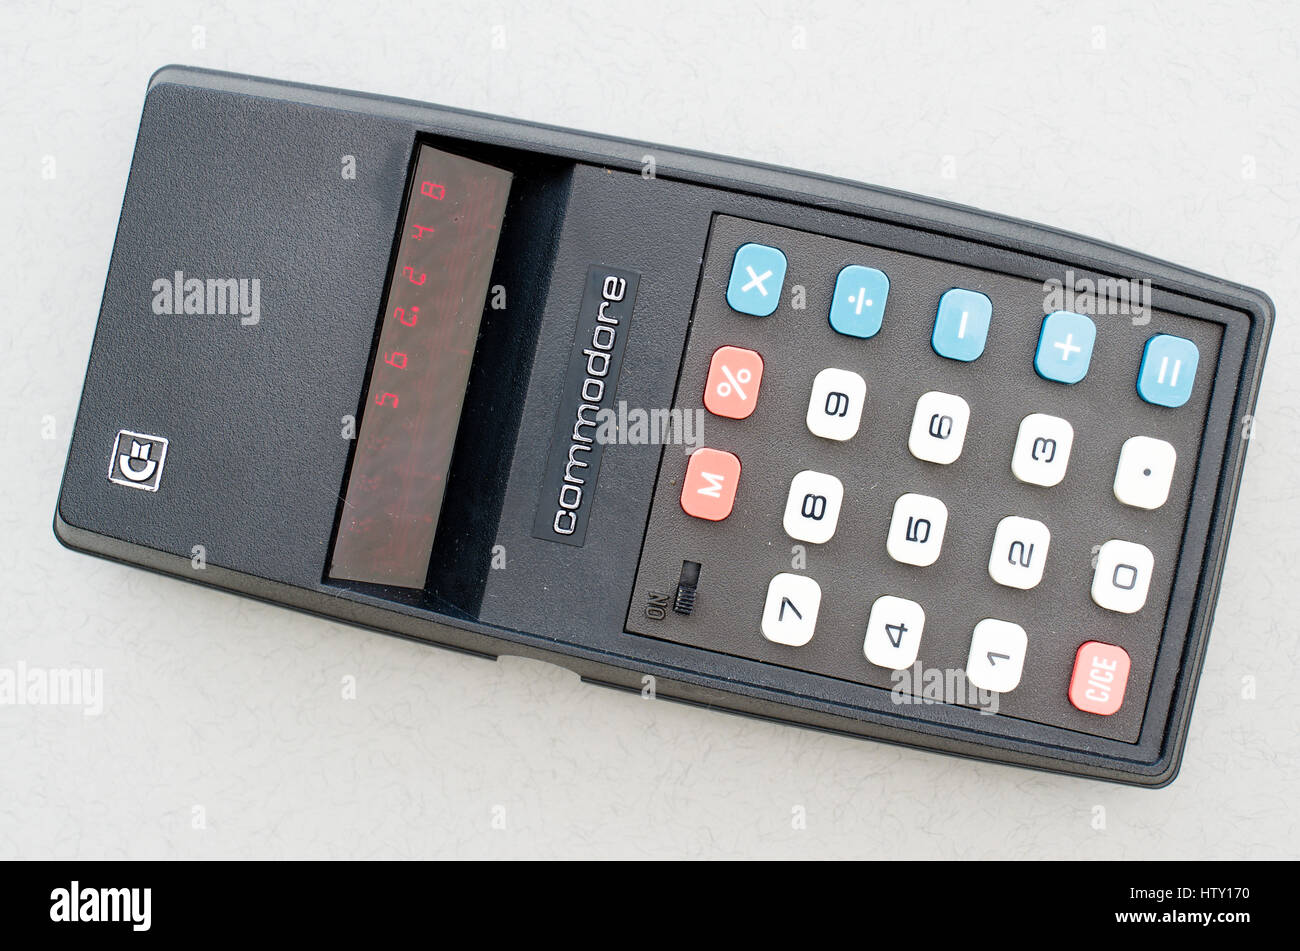 Old Commodore hand calculator Model 796M dating from the 1970s Stock Photo